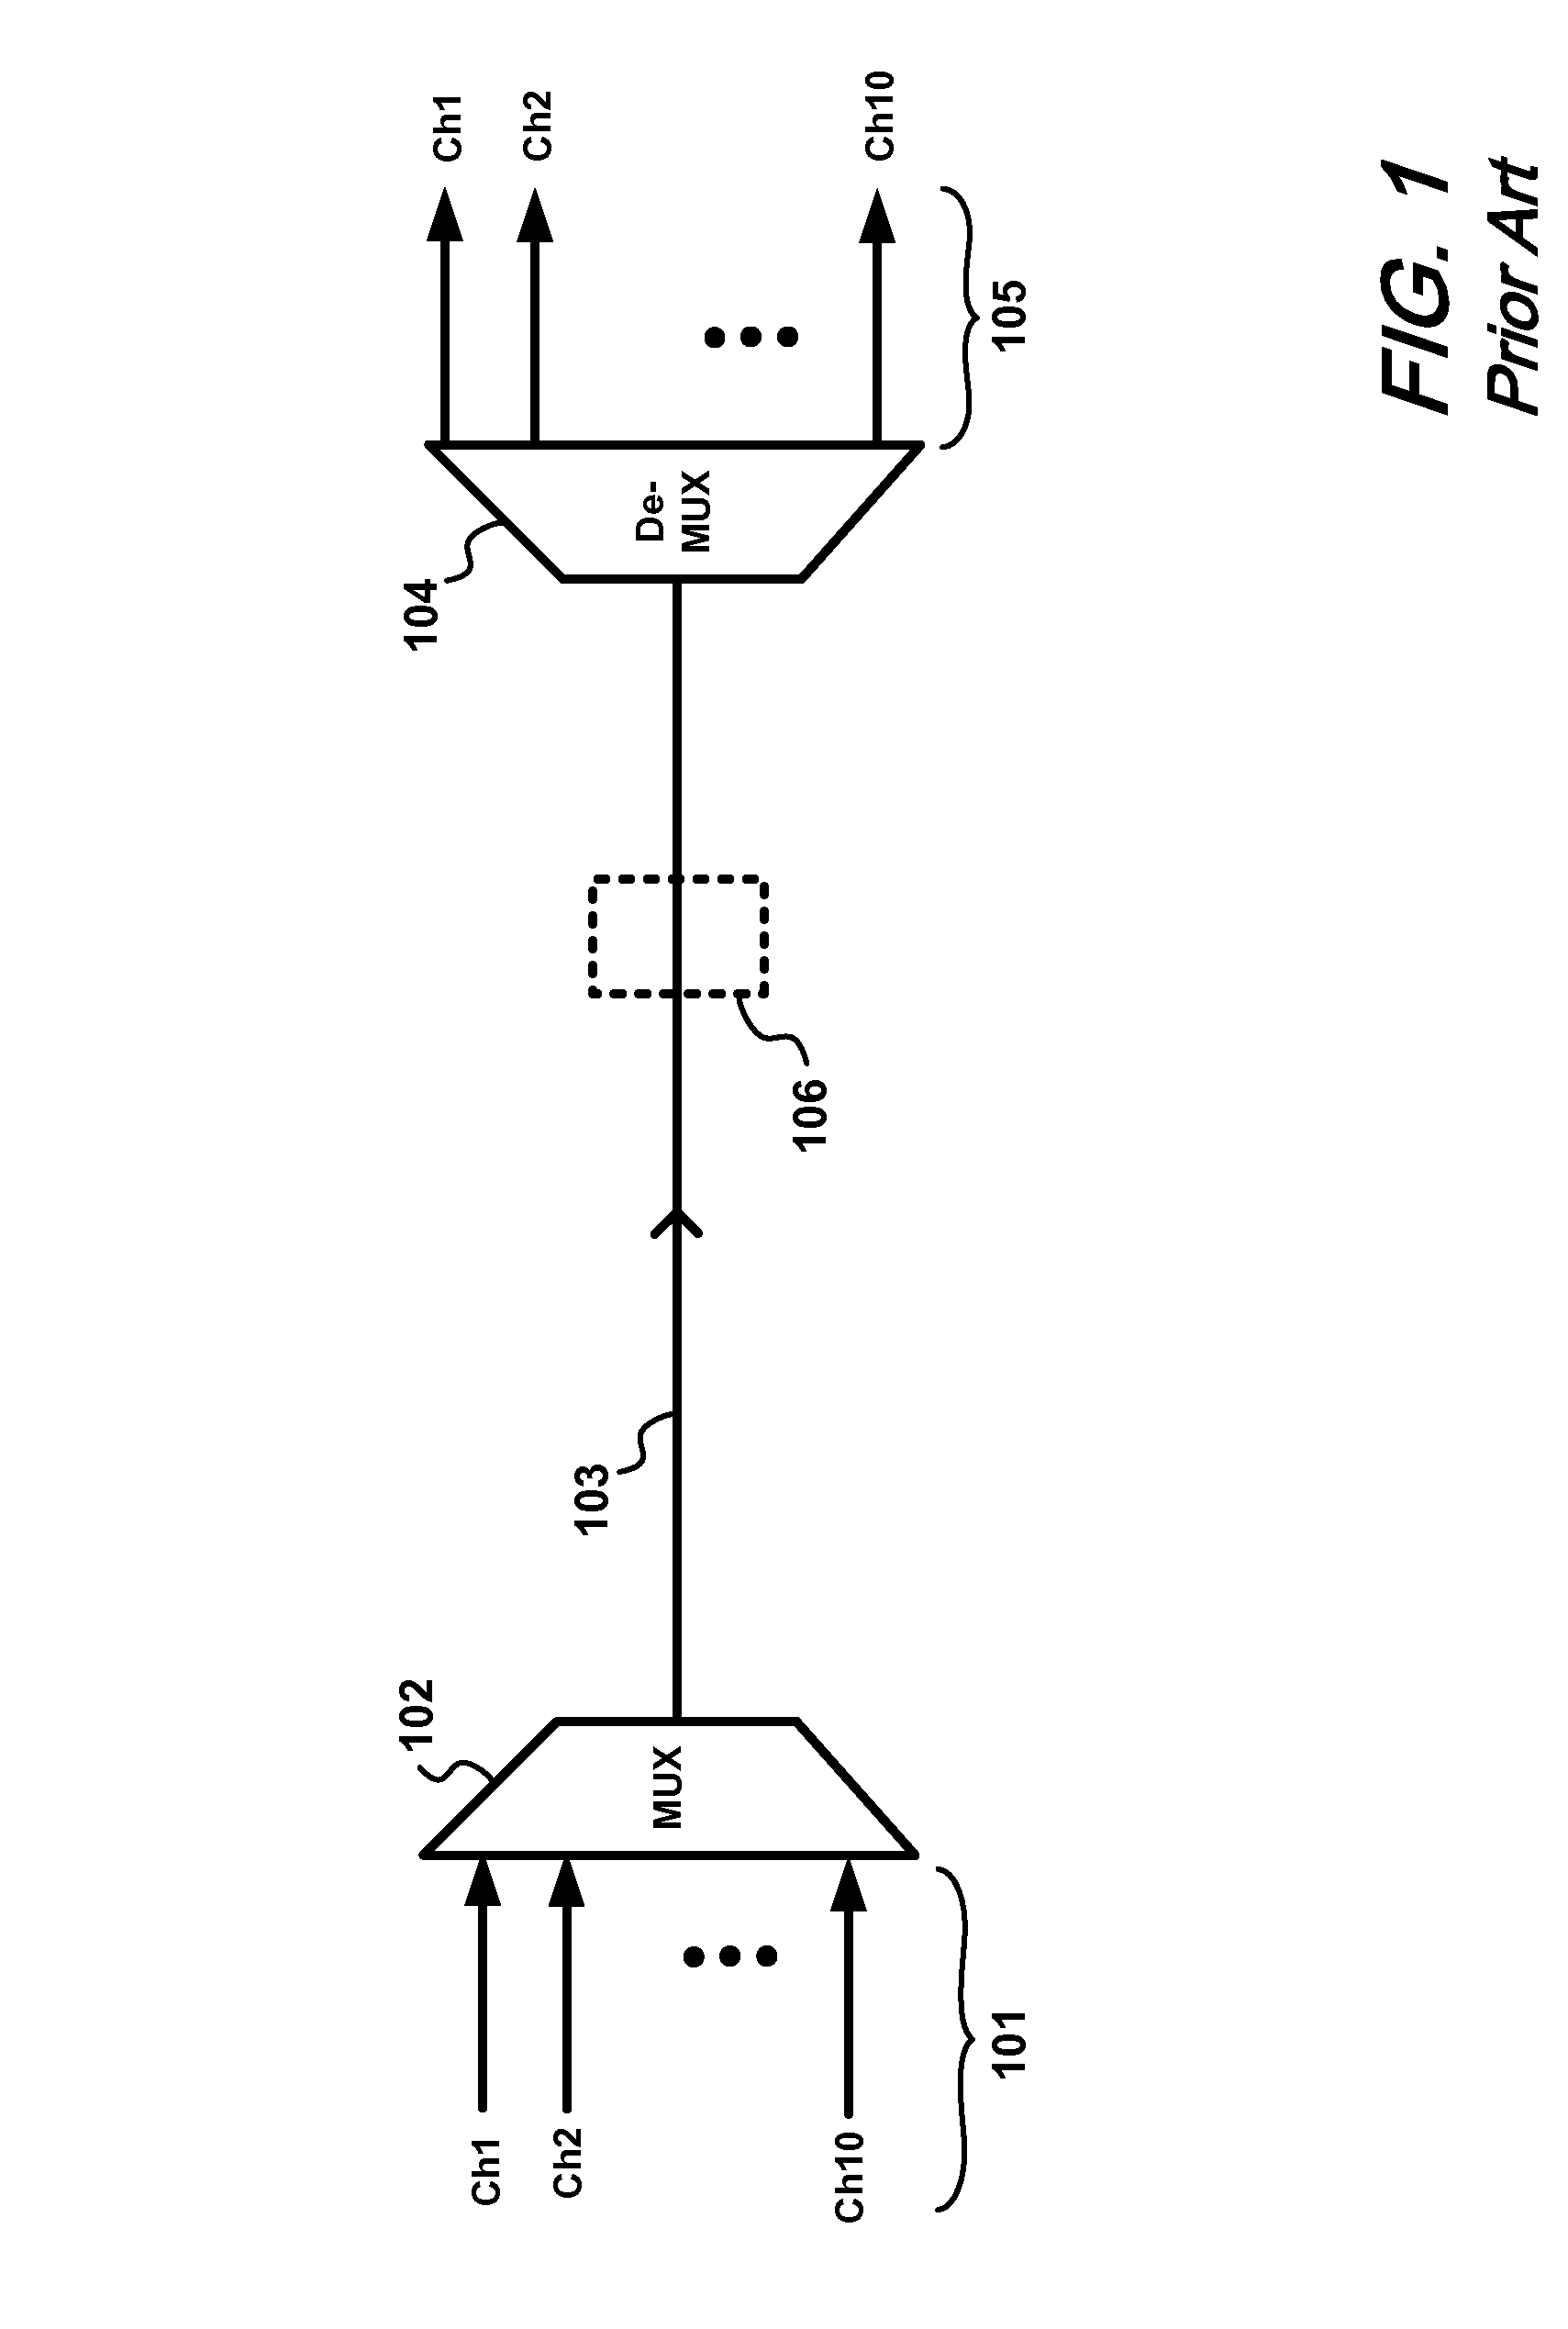 Packet transport arrangement for the transmission of multiplexed channelized packet signals